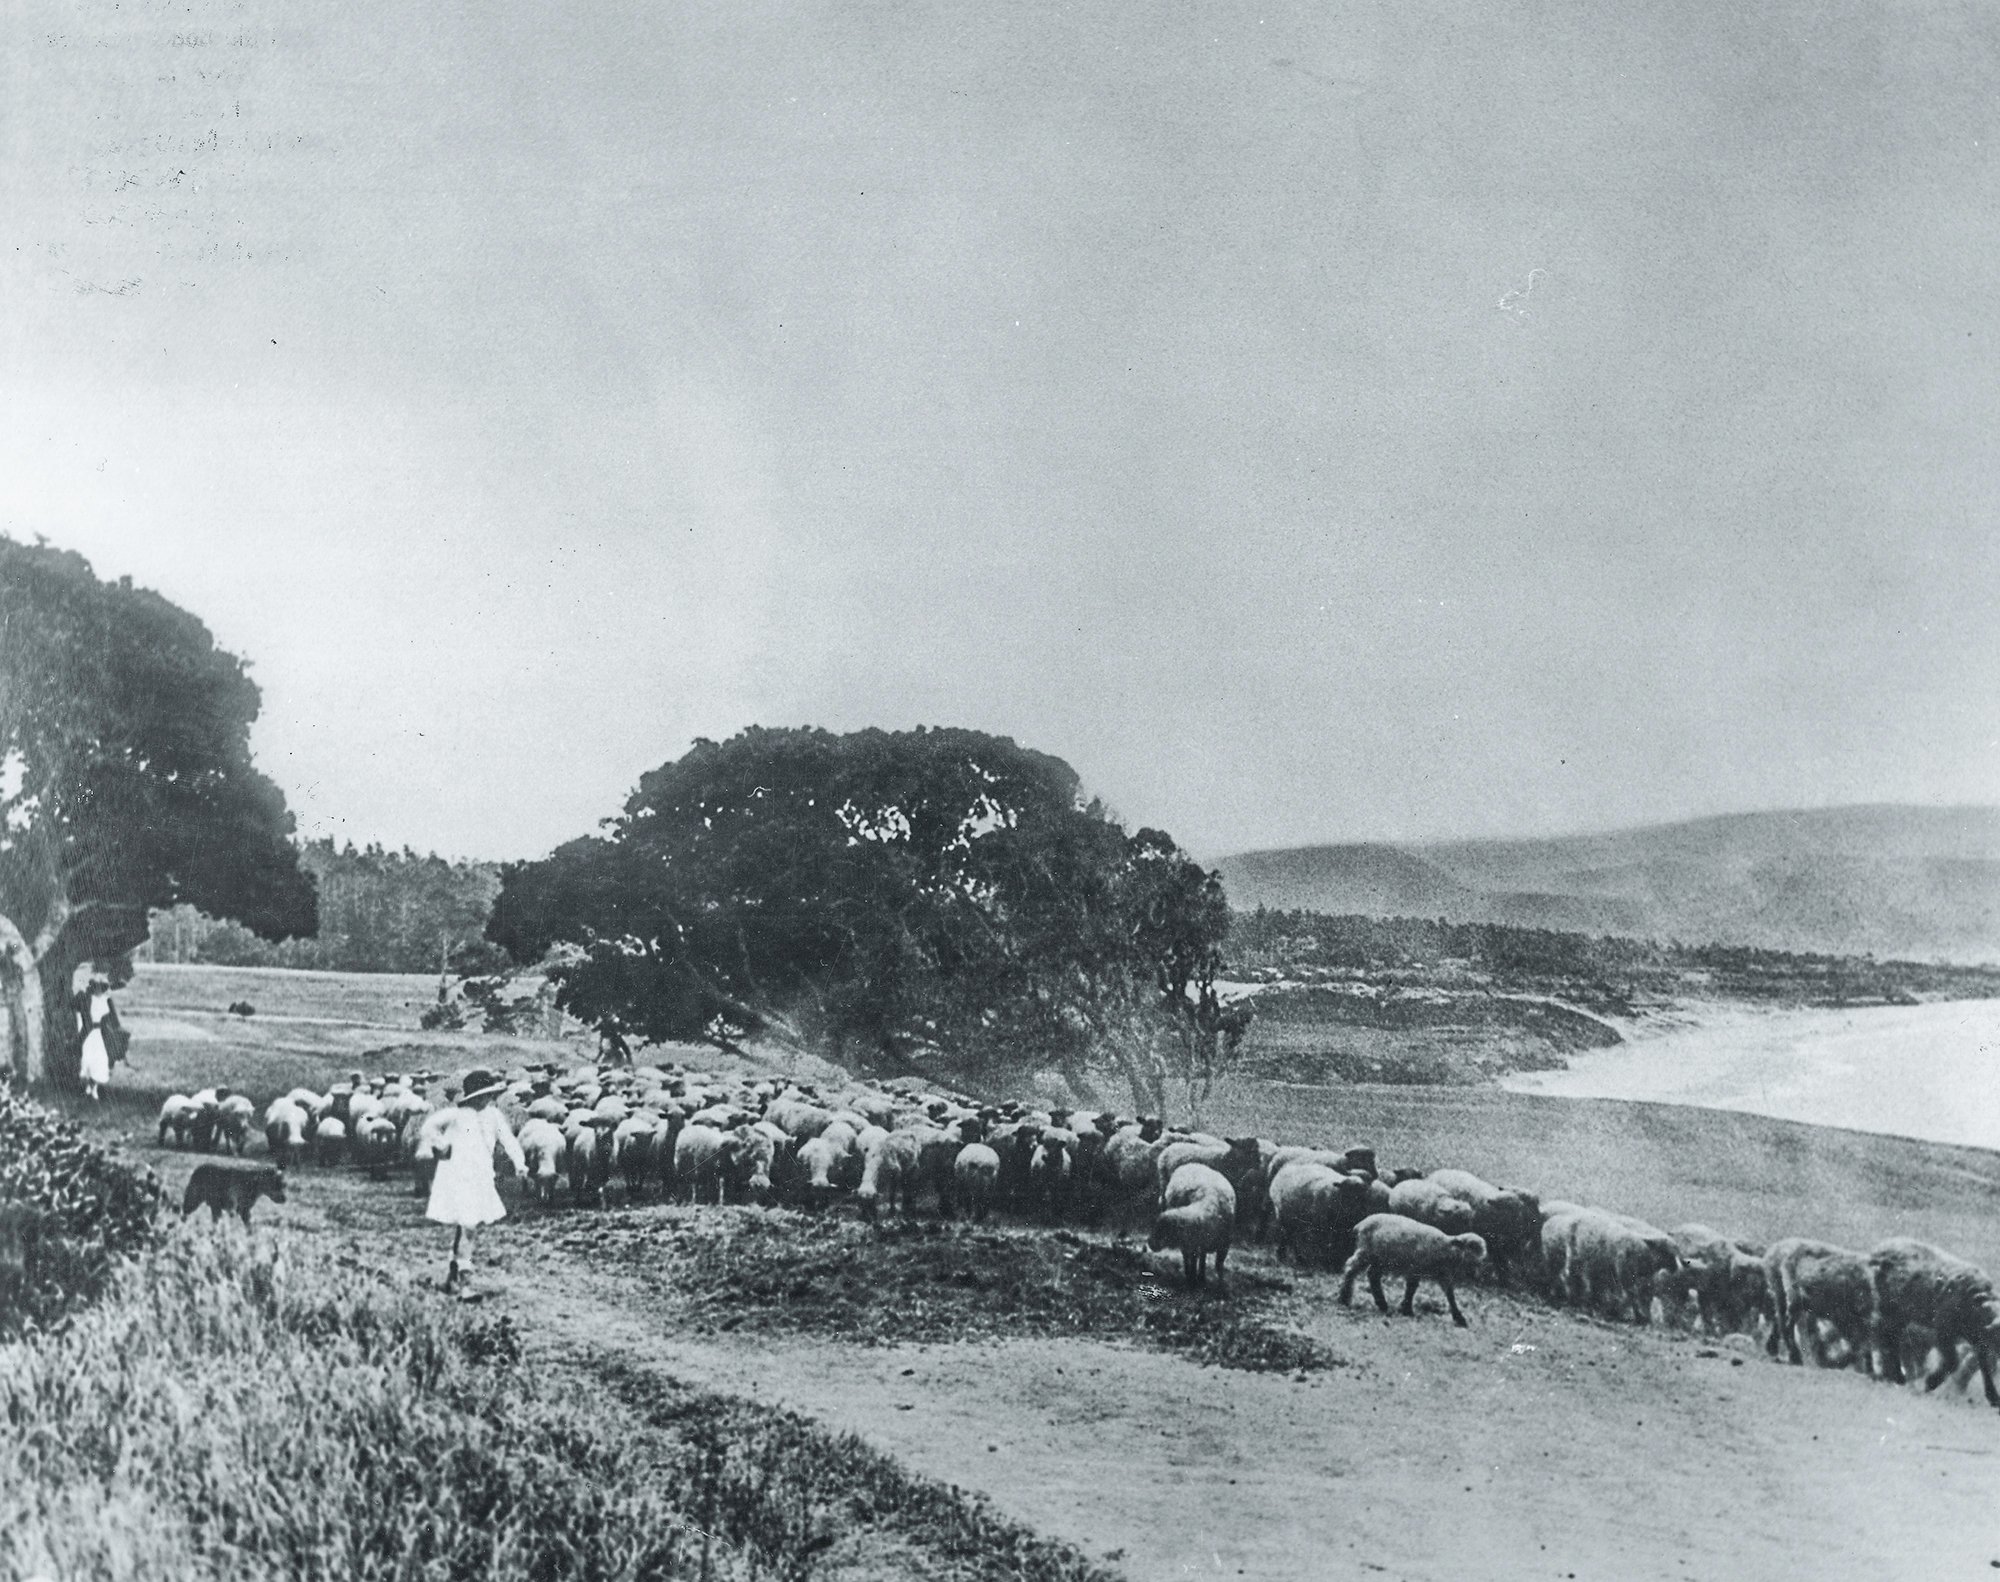 Sheep on the 14th hole at Pebble Beach